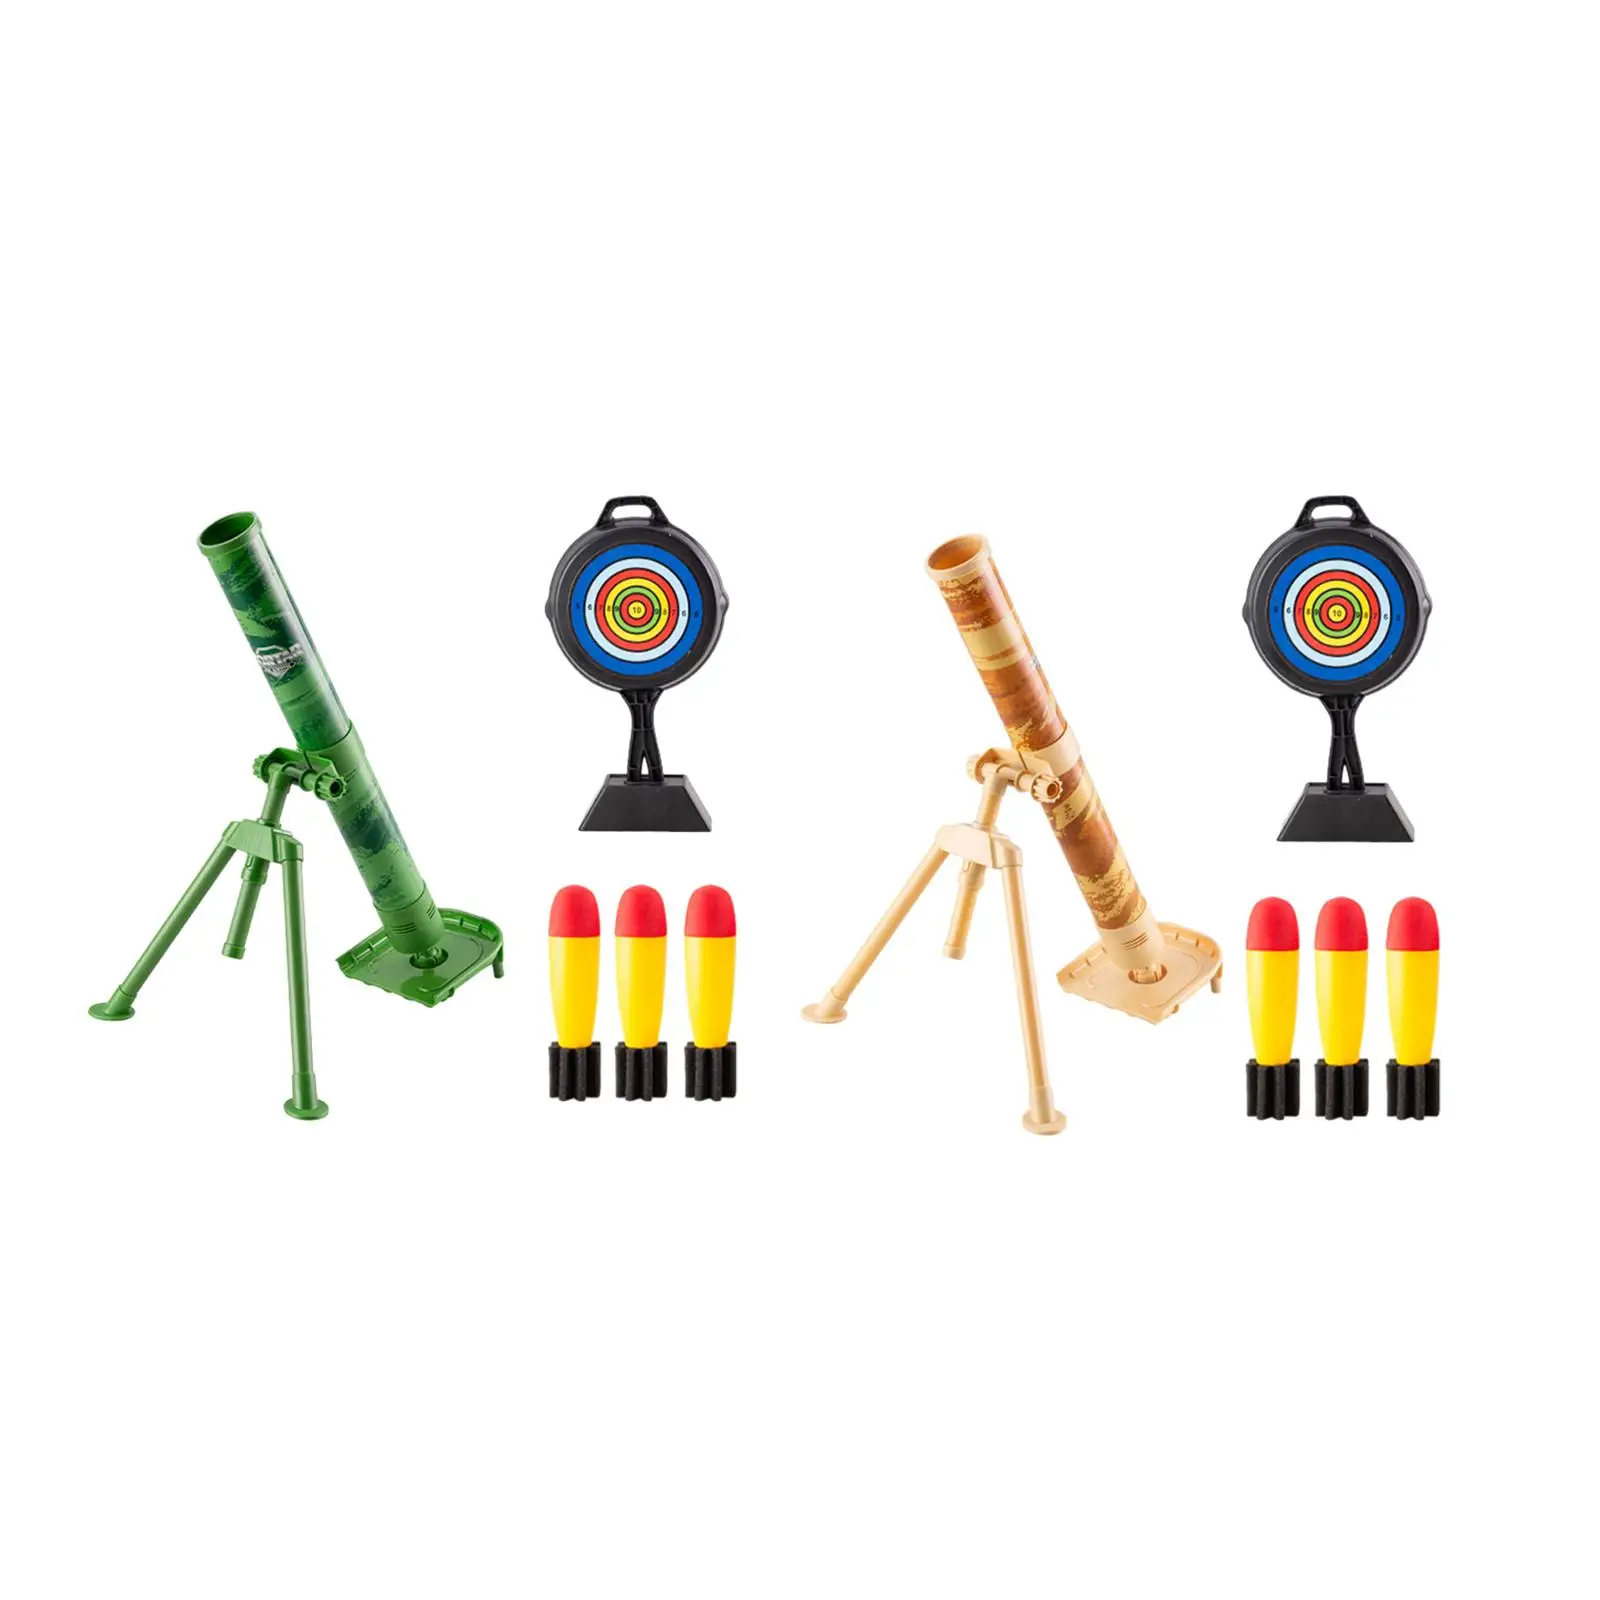 Mortar Launcher Toy Set Professional with 3 Safety Foam Shells Rocket Launcher for Kids Boys and Girls Festival Gifts